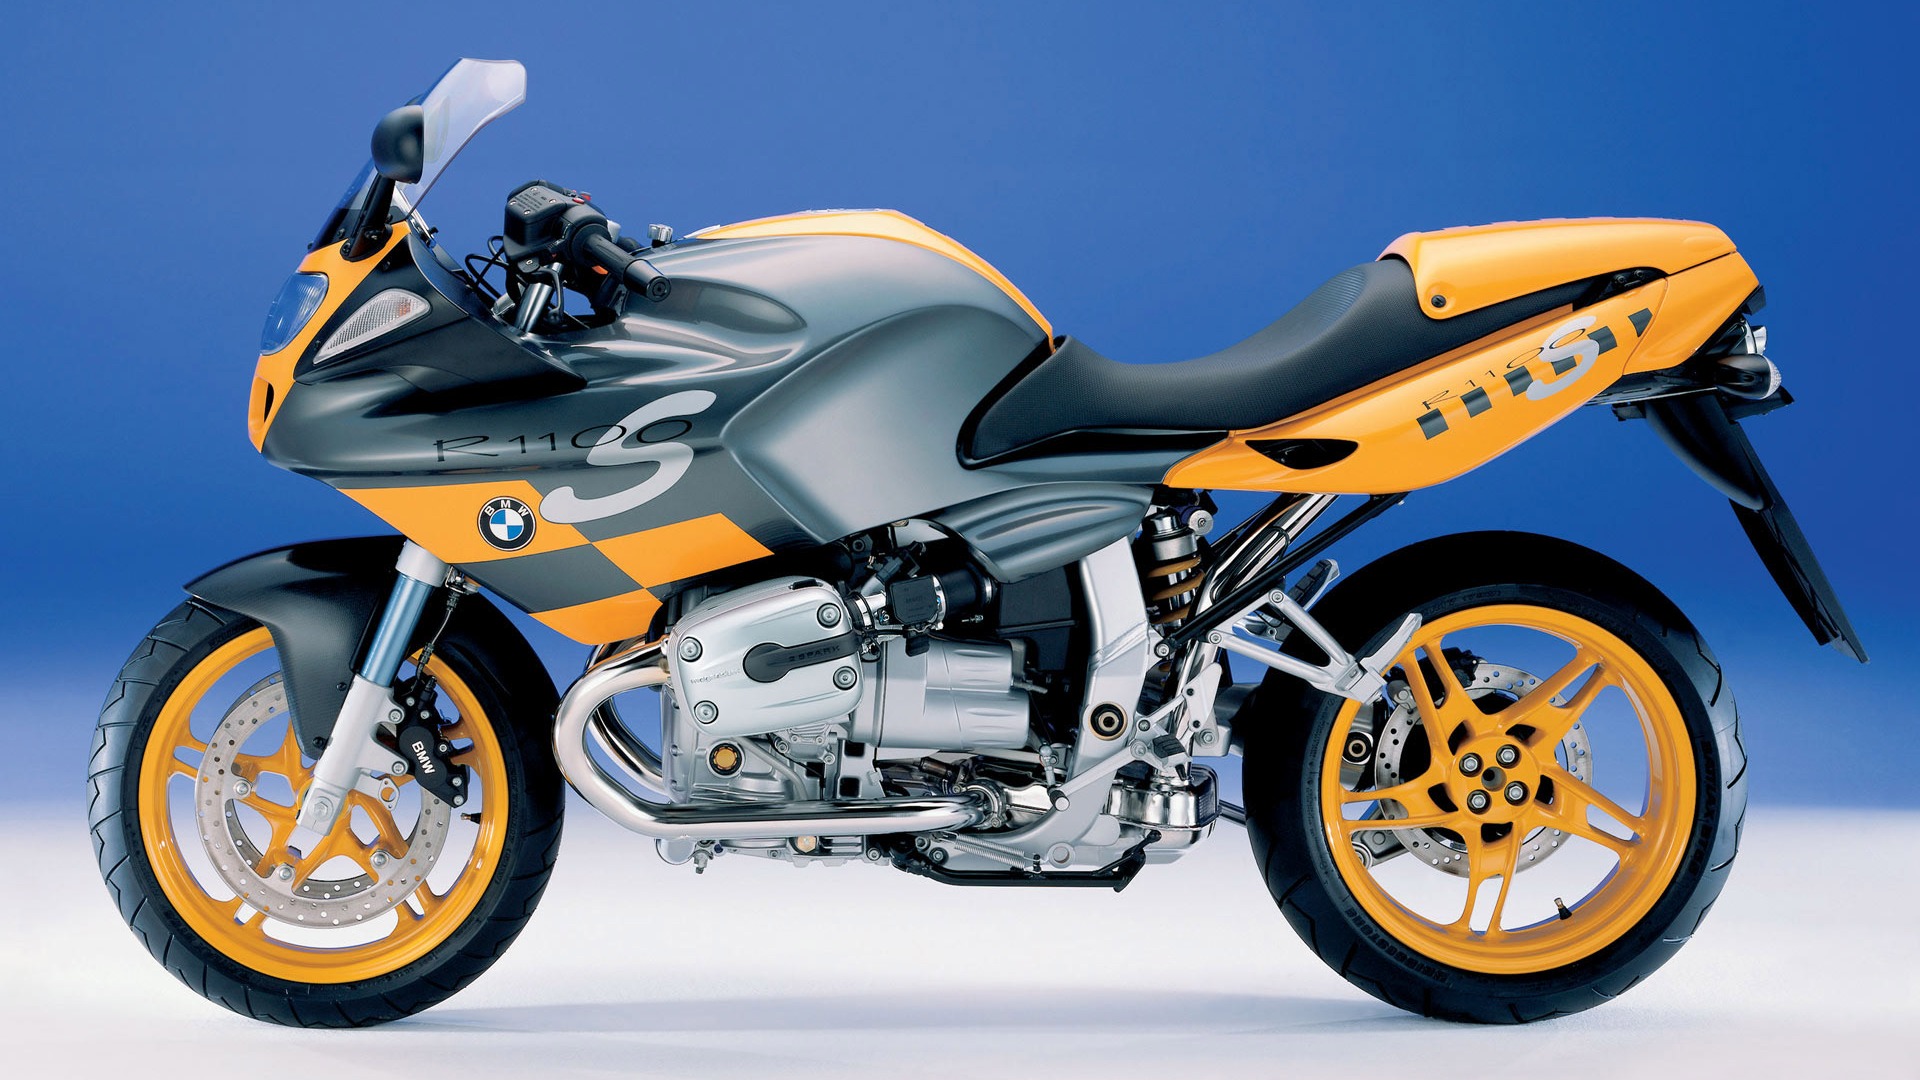 BMW motorcycle wallpapers (1) #6 - 1920x1080